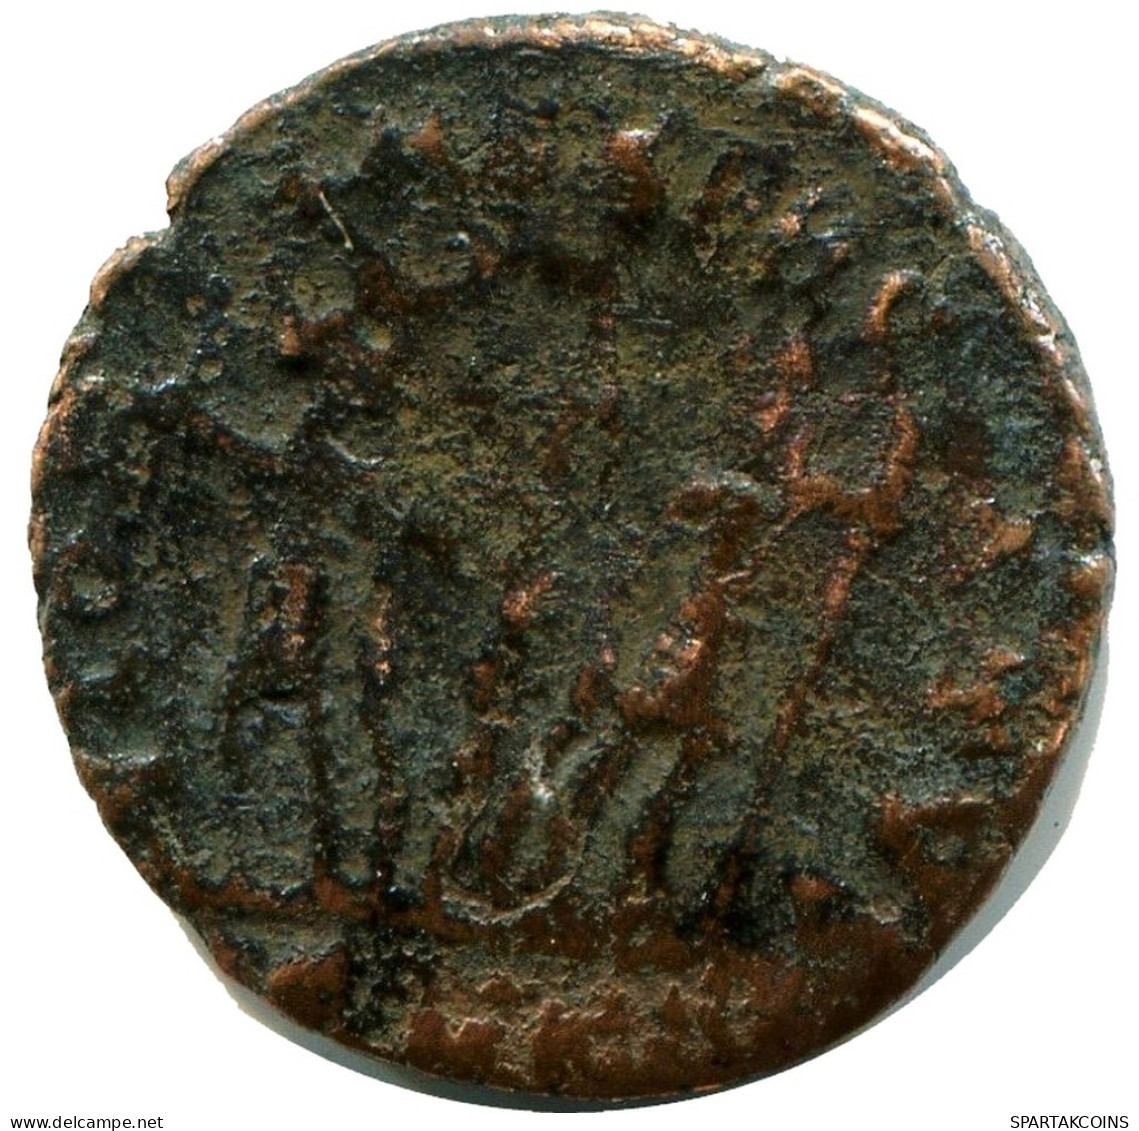 CONSTANS MINTED IN CYZICUS FROM THE ROYAL ONTARIO MUSEUM #ANC11659.14.F.A - The Christian Empire (307 AD Tot 363 AD)